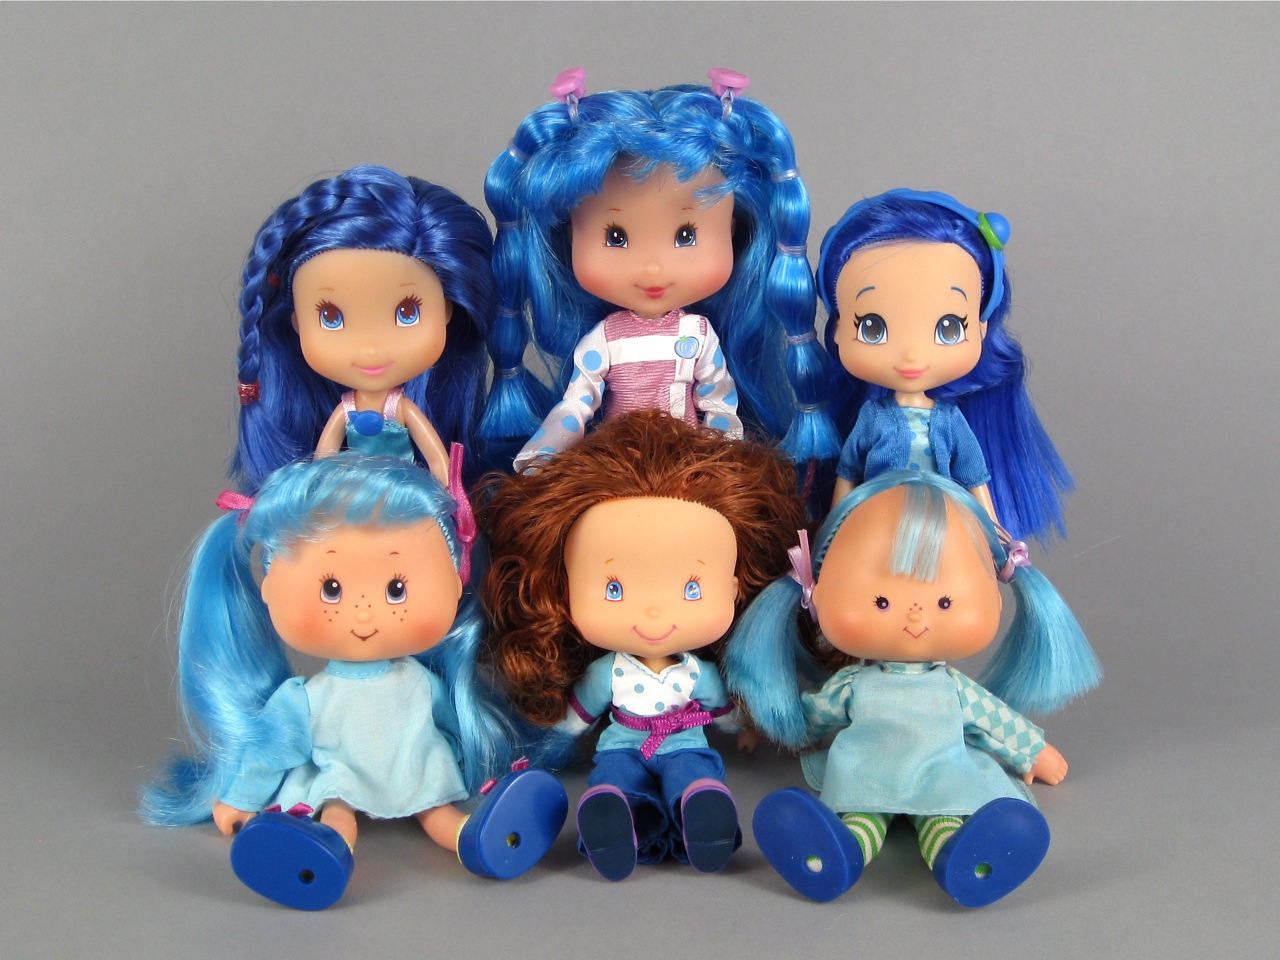 Strawberry Shortcake Blueberry Muffin Doll with Blue Hair - wide 2